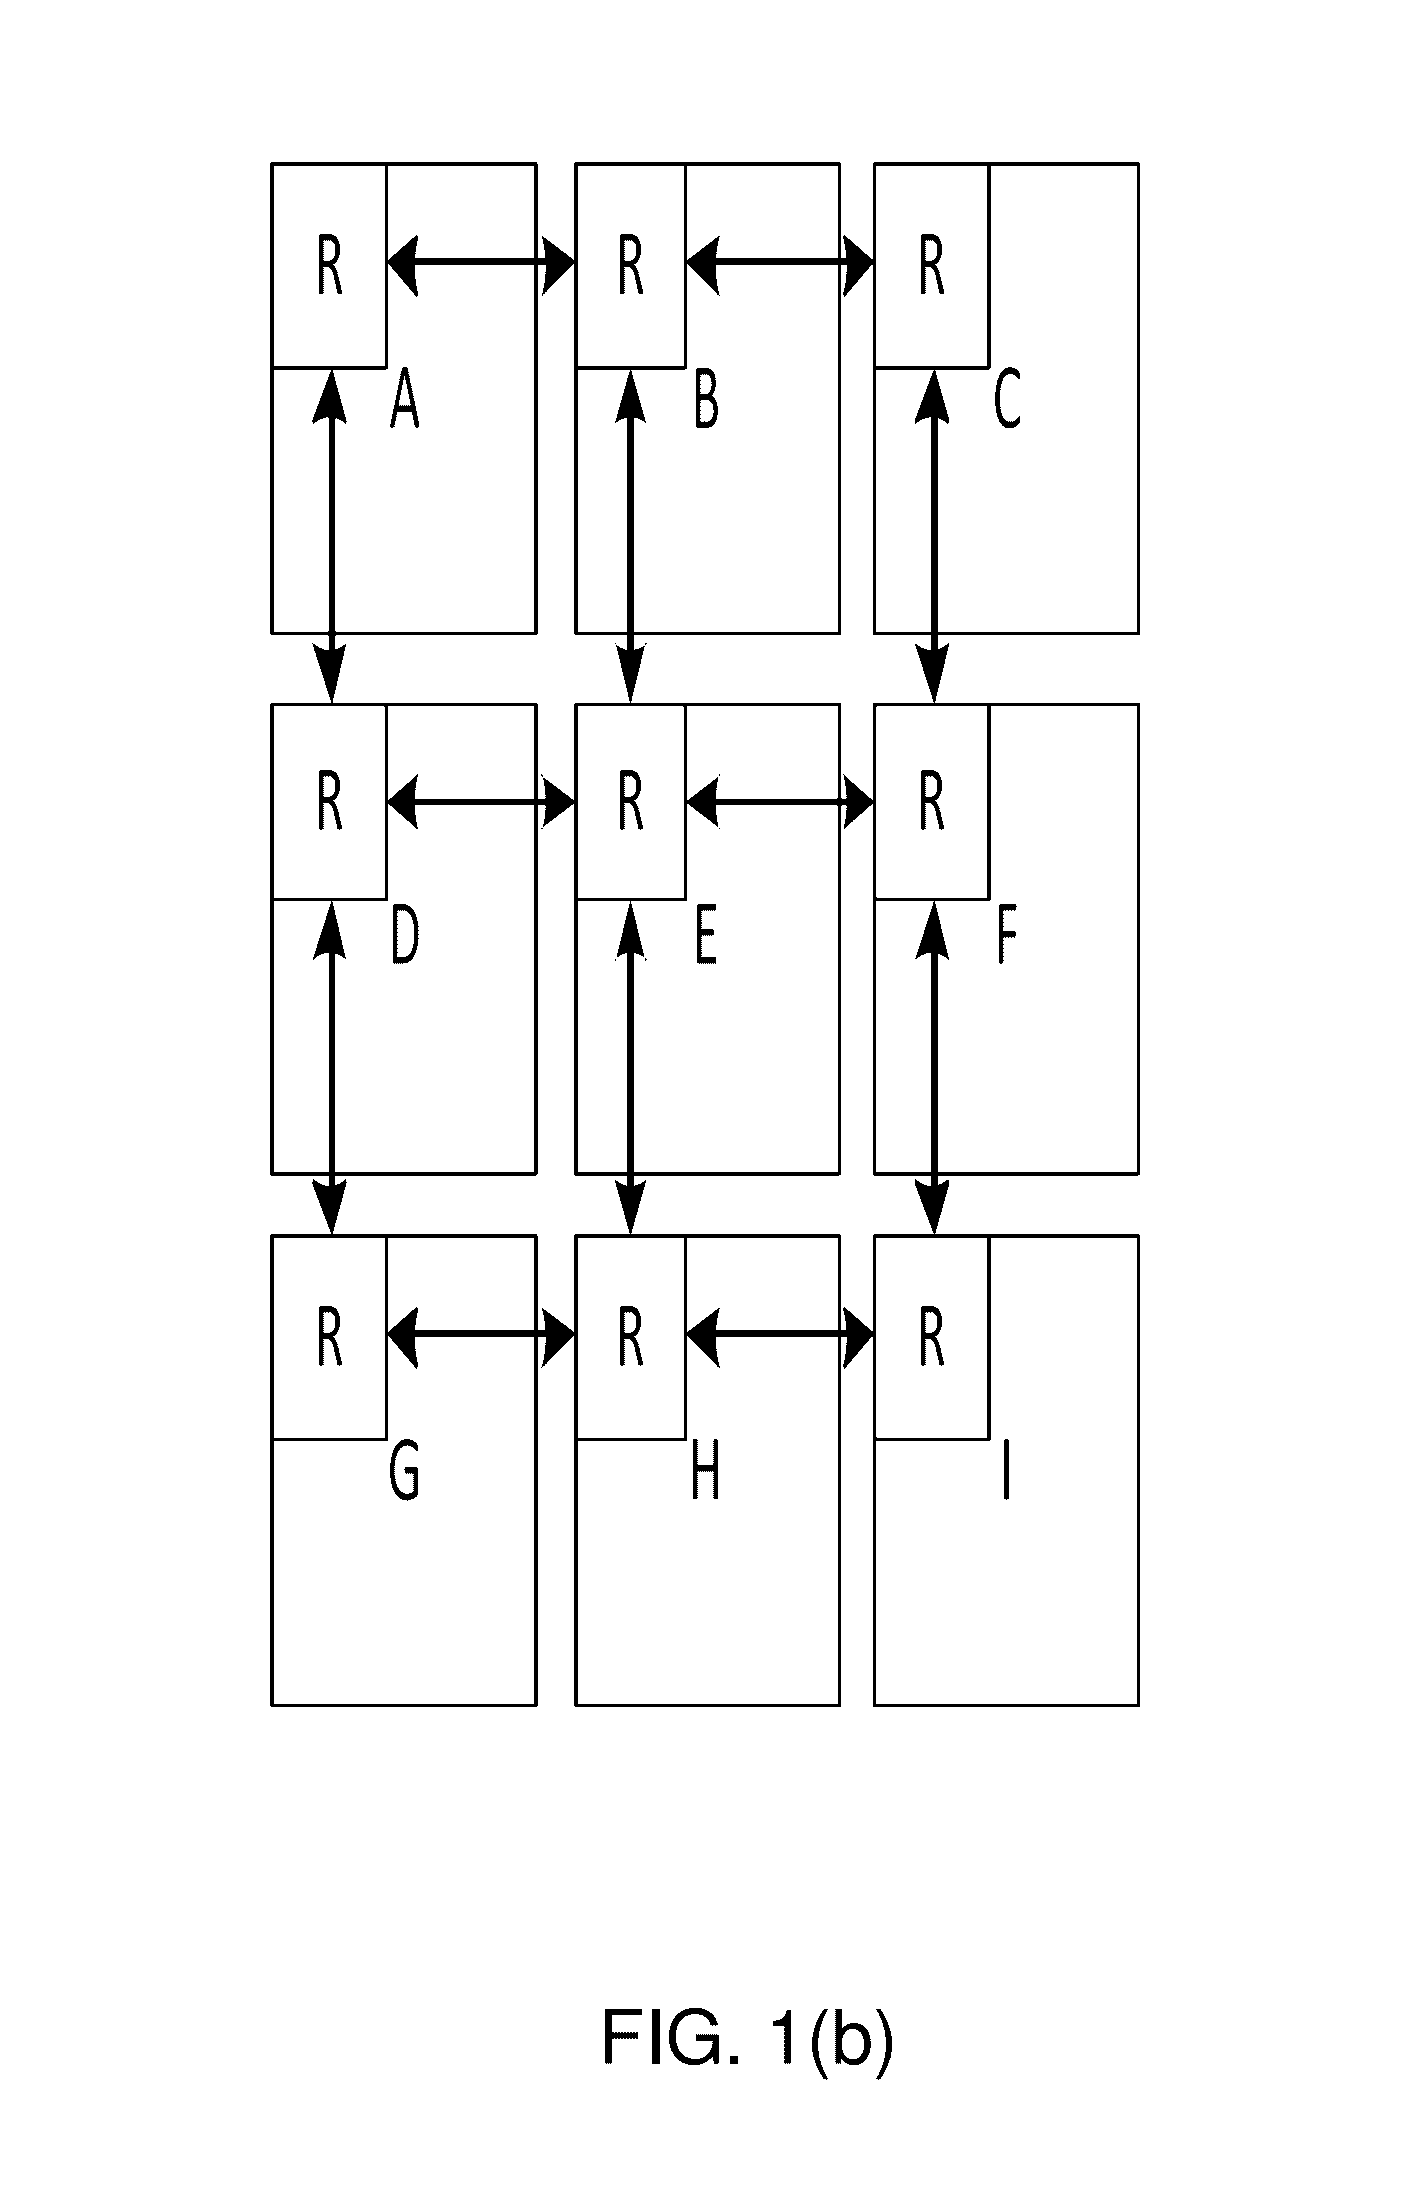 Automatic power domain and voltage domain assignment to system-on-chip agents and network-on-chip elements